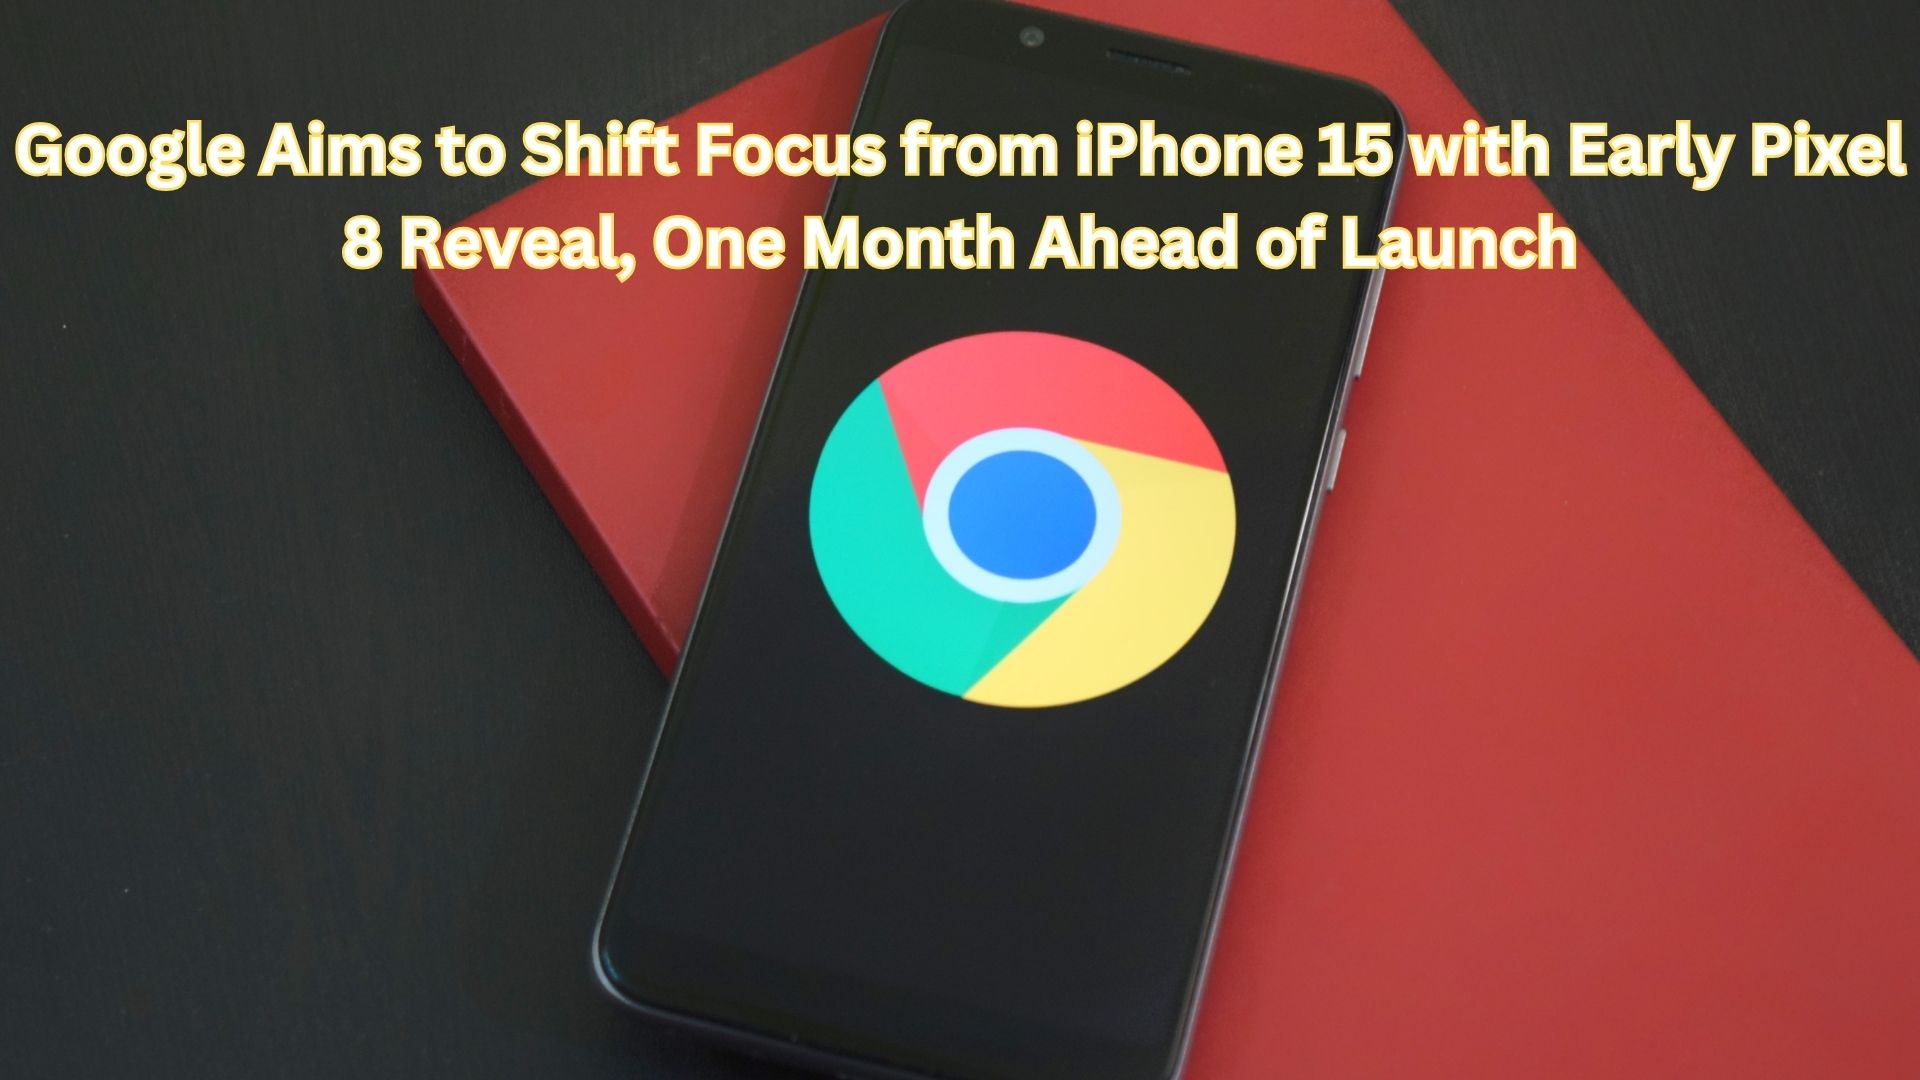 Google Aims to Shift Focus from iPhone 15 with Early Pixel 8 Reveal, One Month Ahead of Launch